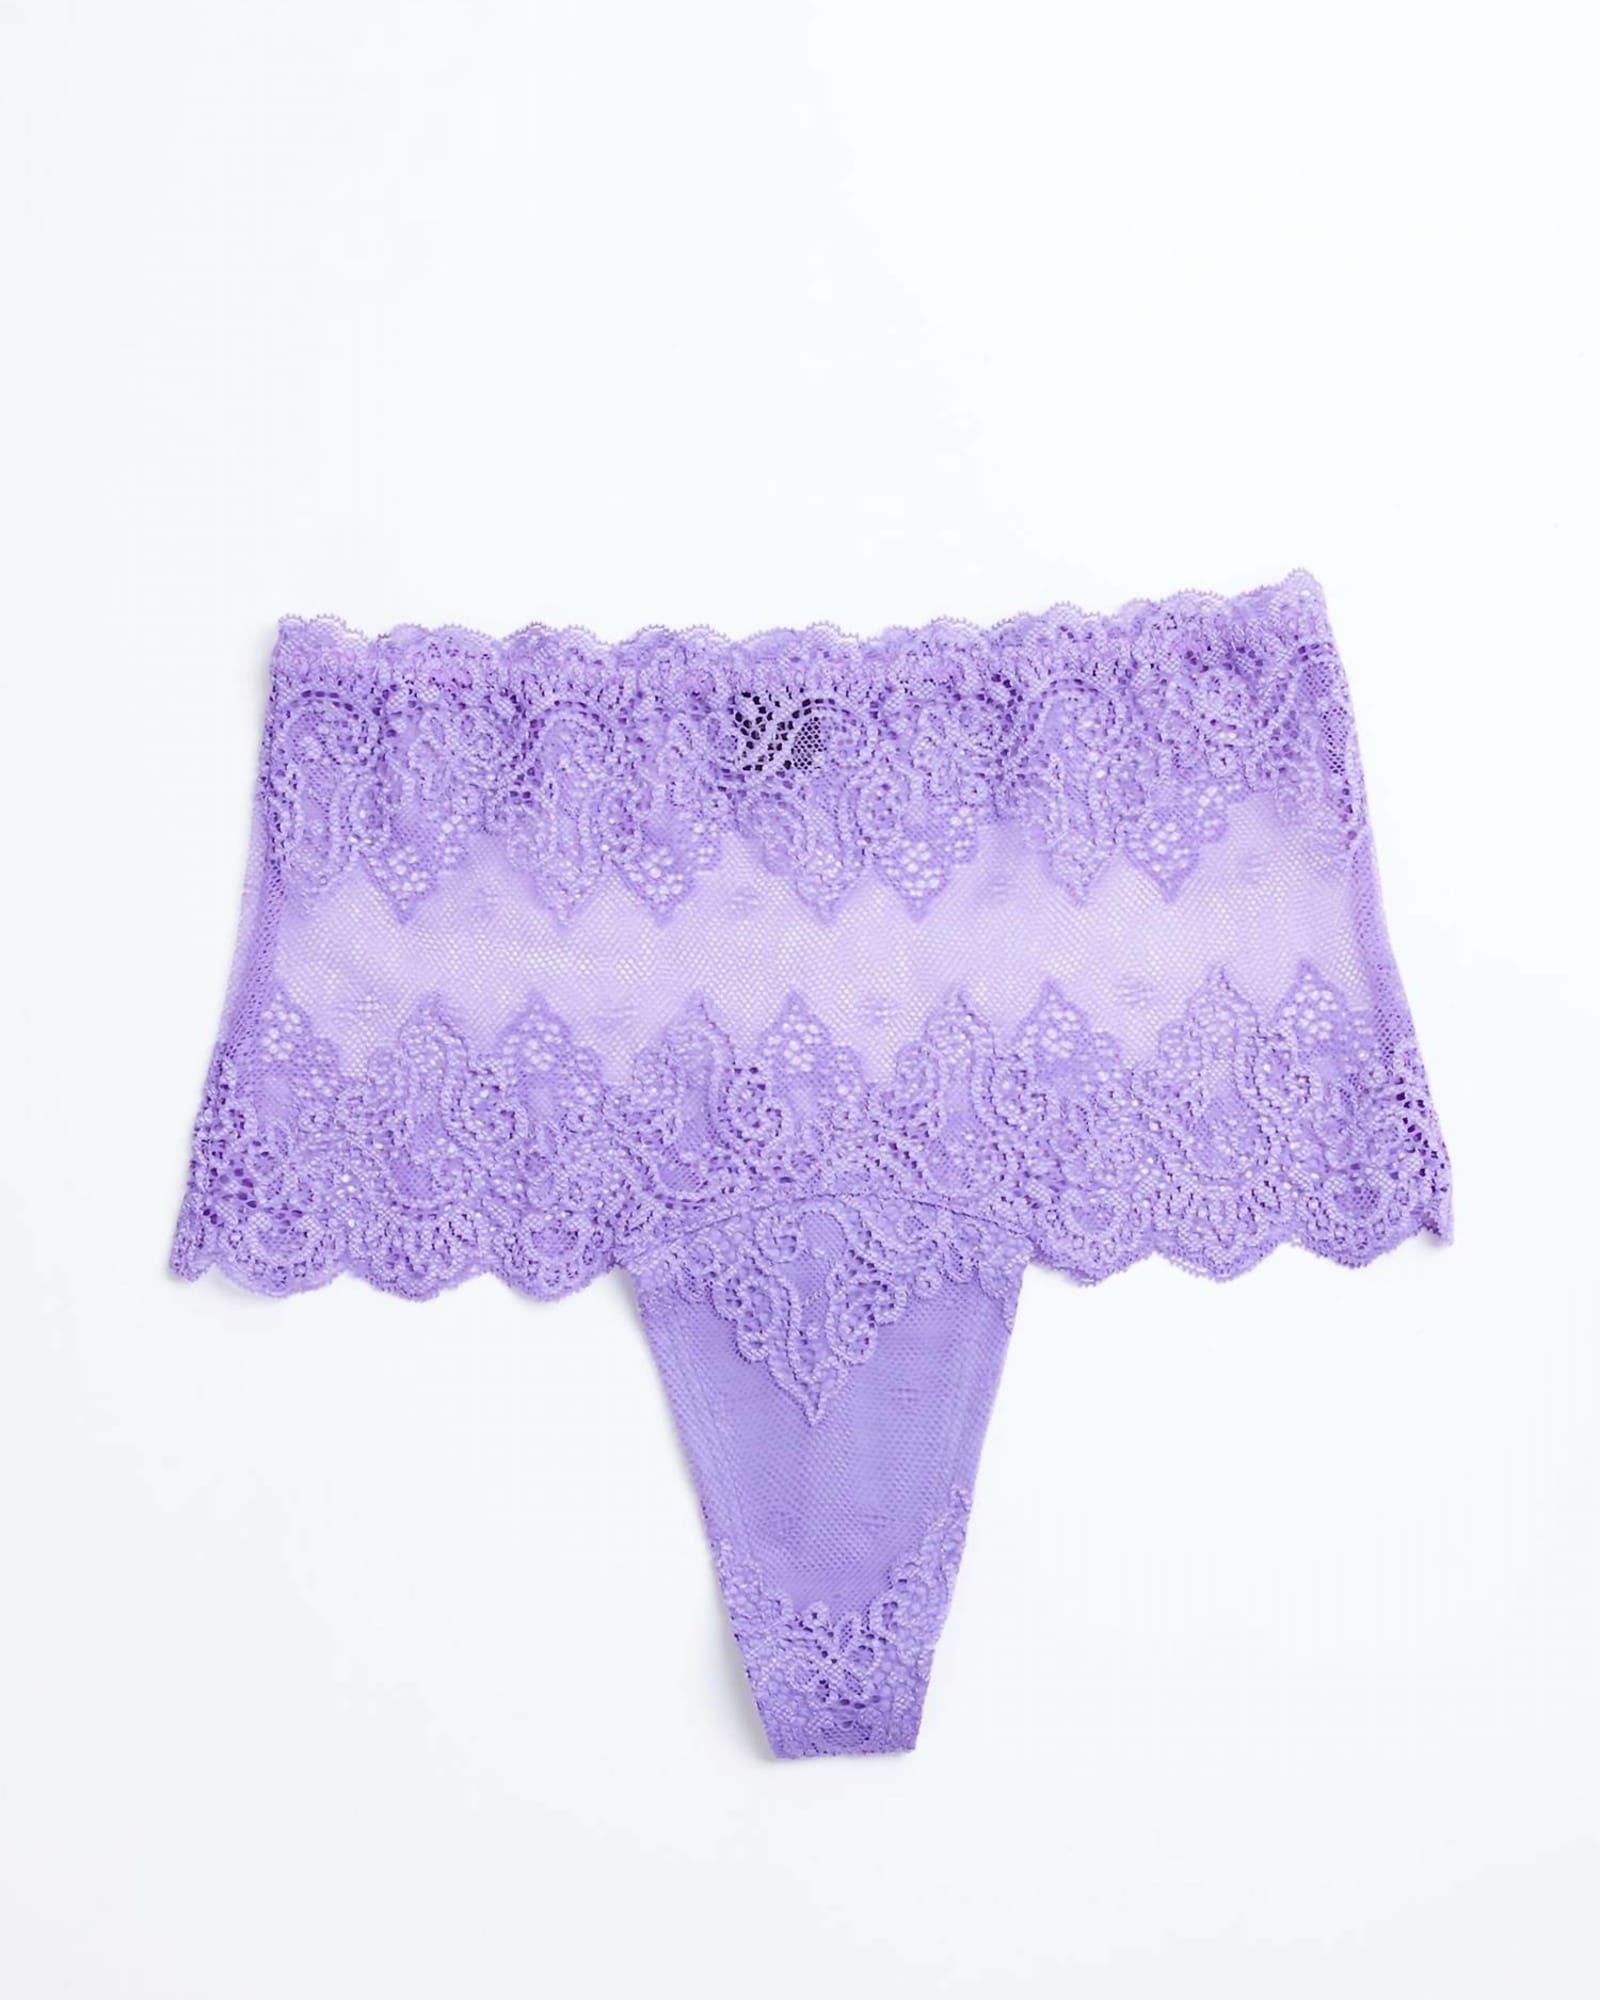 So Fine Lace High Cut Thong in Violet | Violet